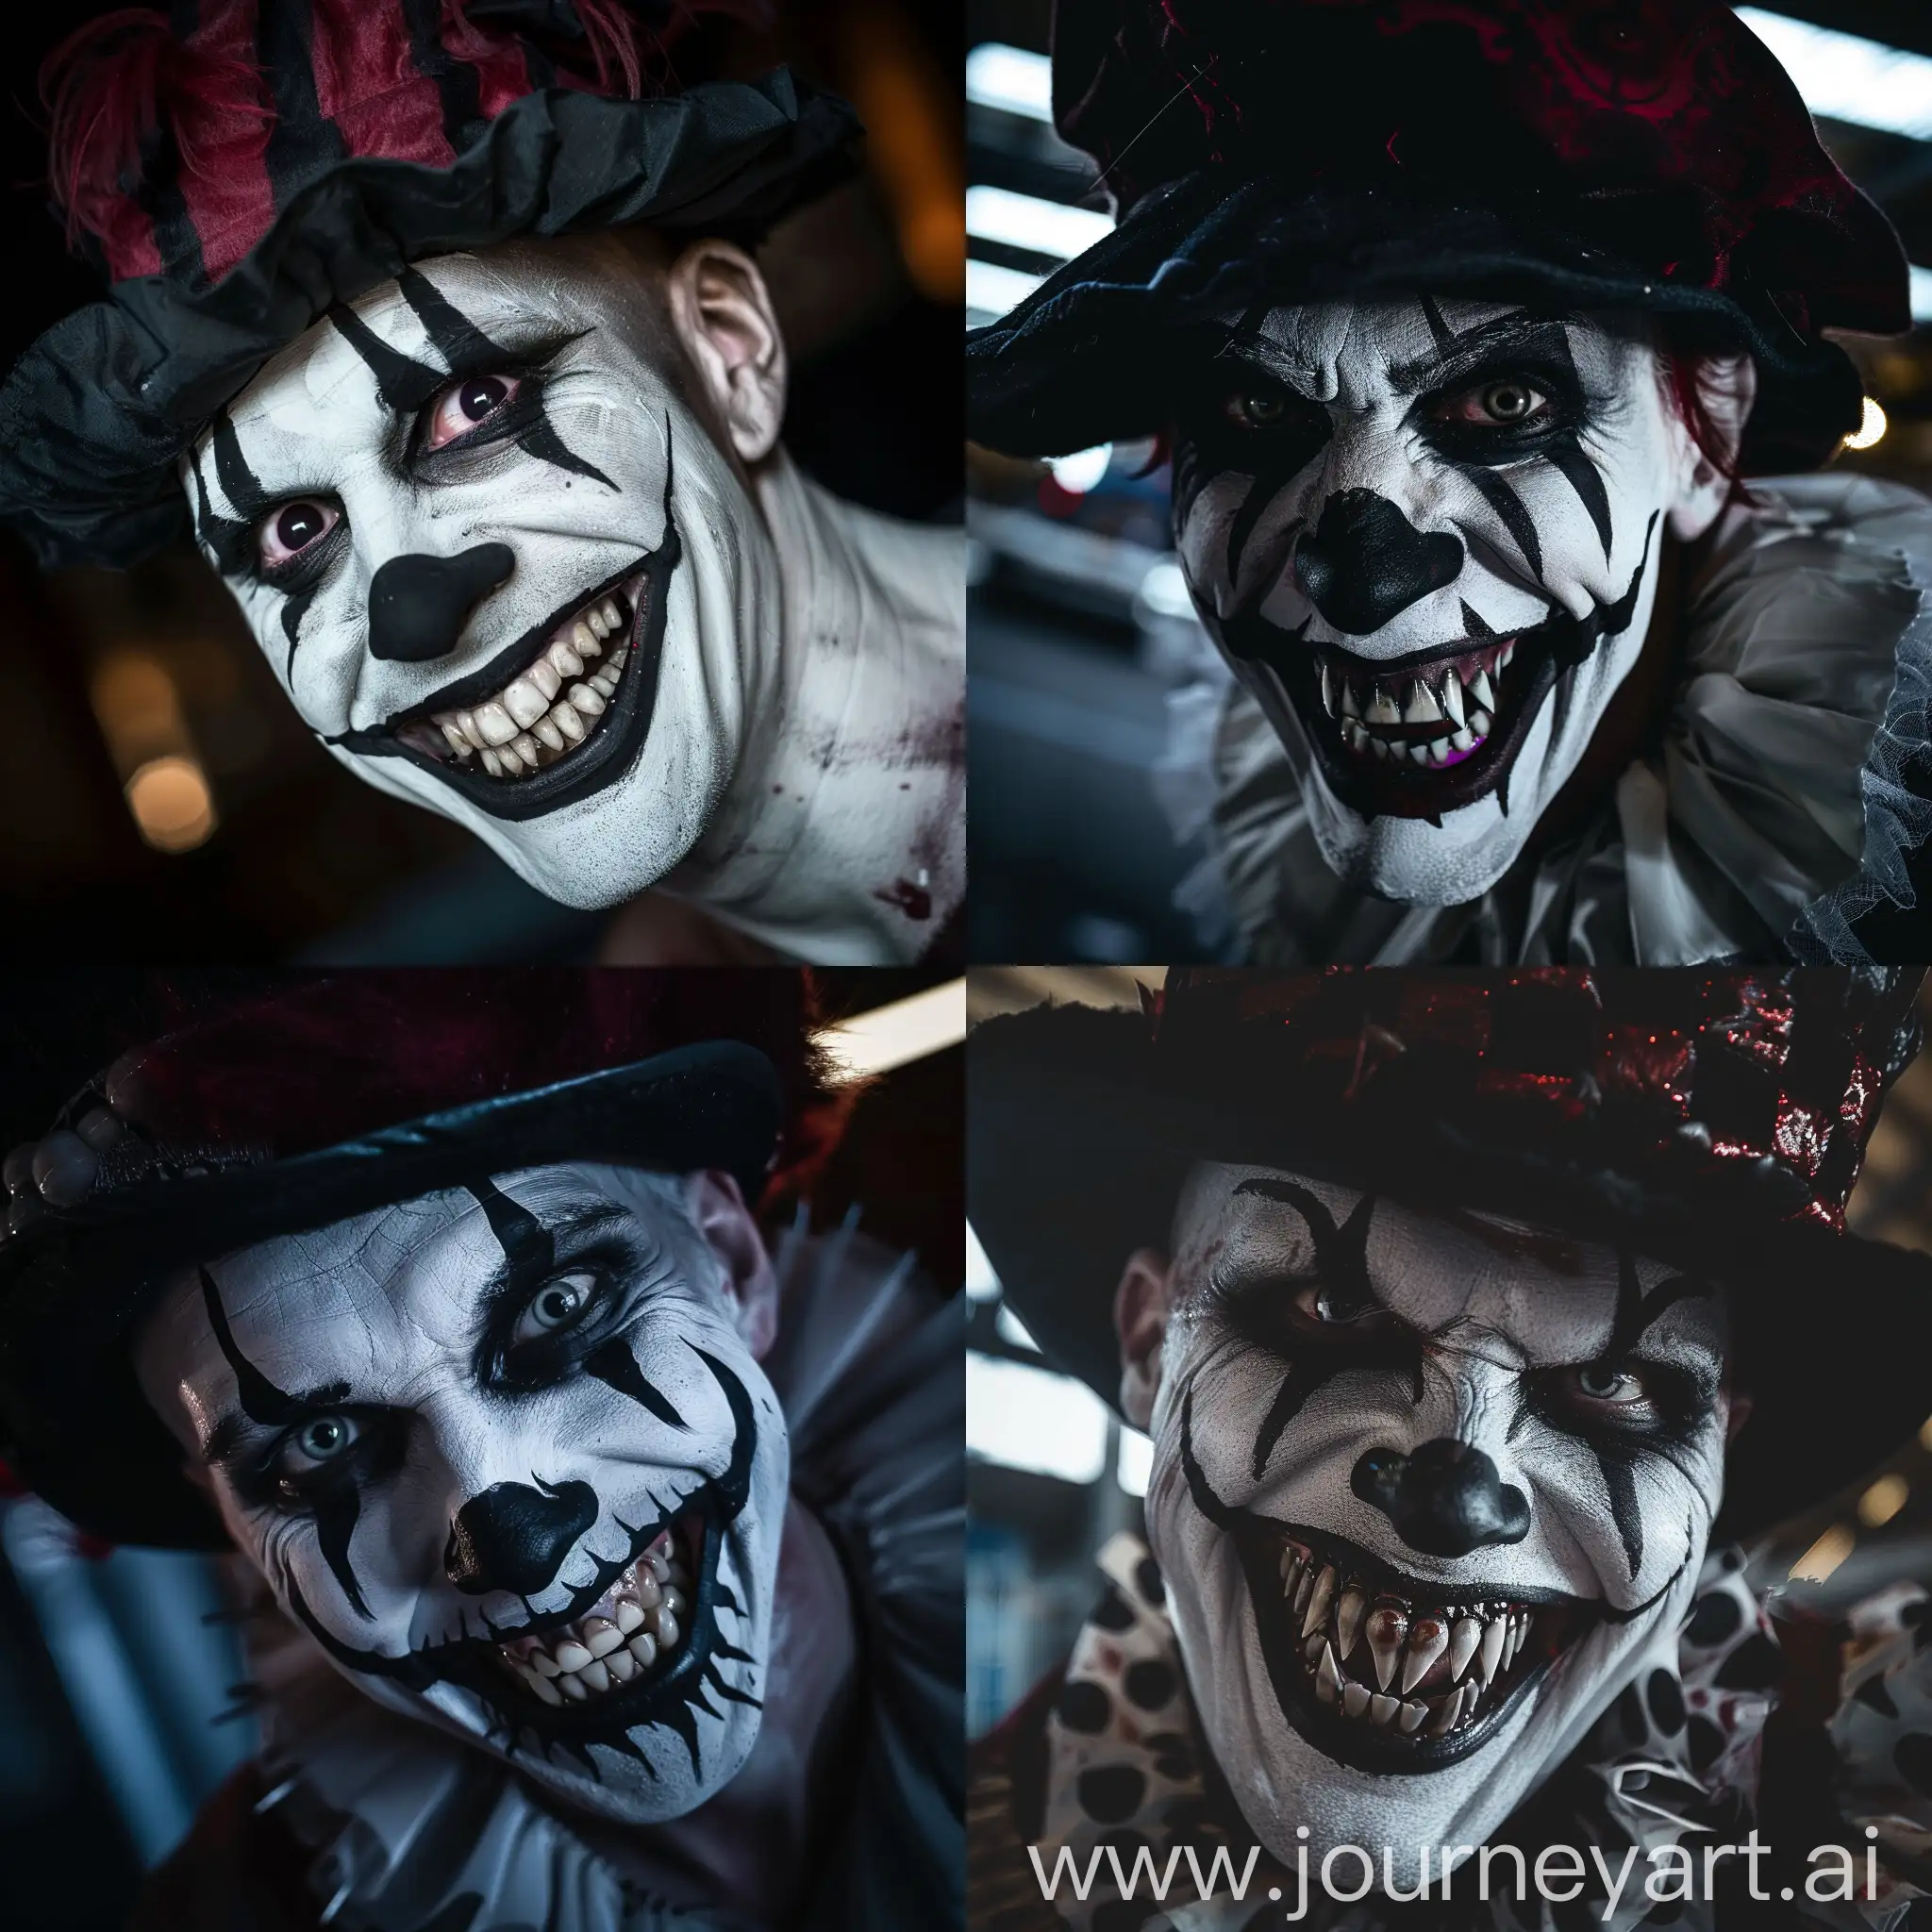 Man with white facepaint, black lips, big sharp teeth, smiling, black and dark red clown hat, close up to face, at dark warehouse, his eyes are scary, dramatic lighting